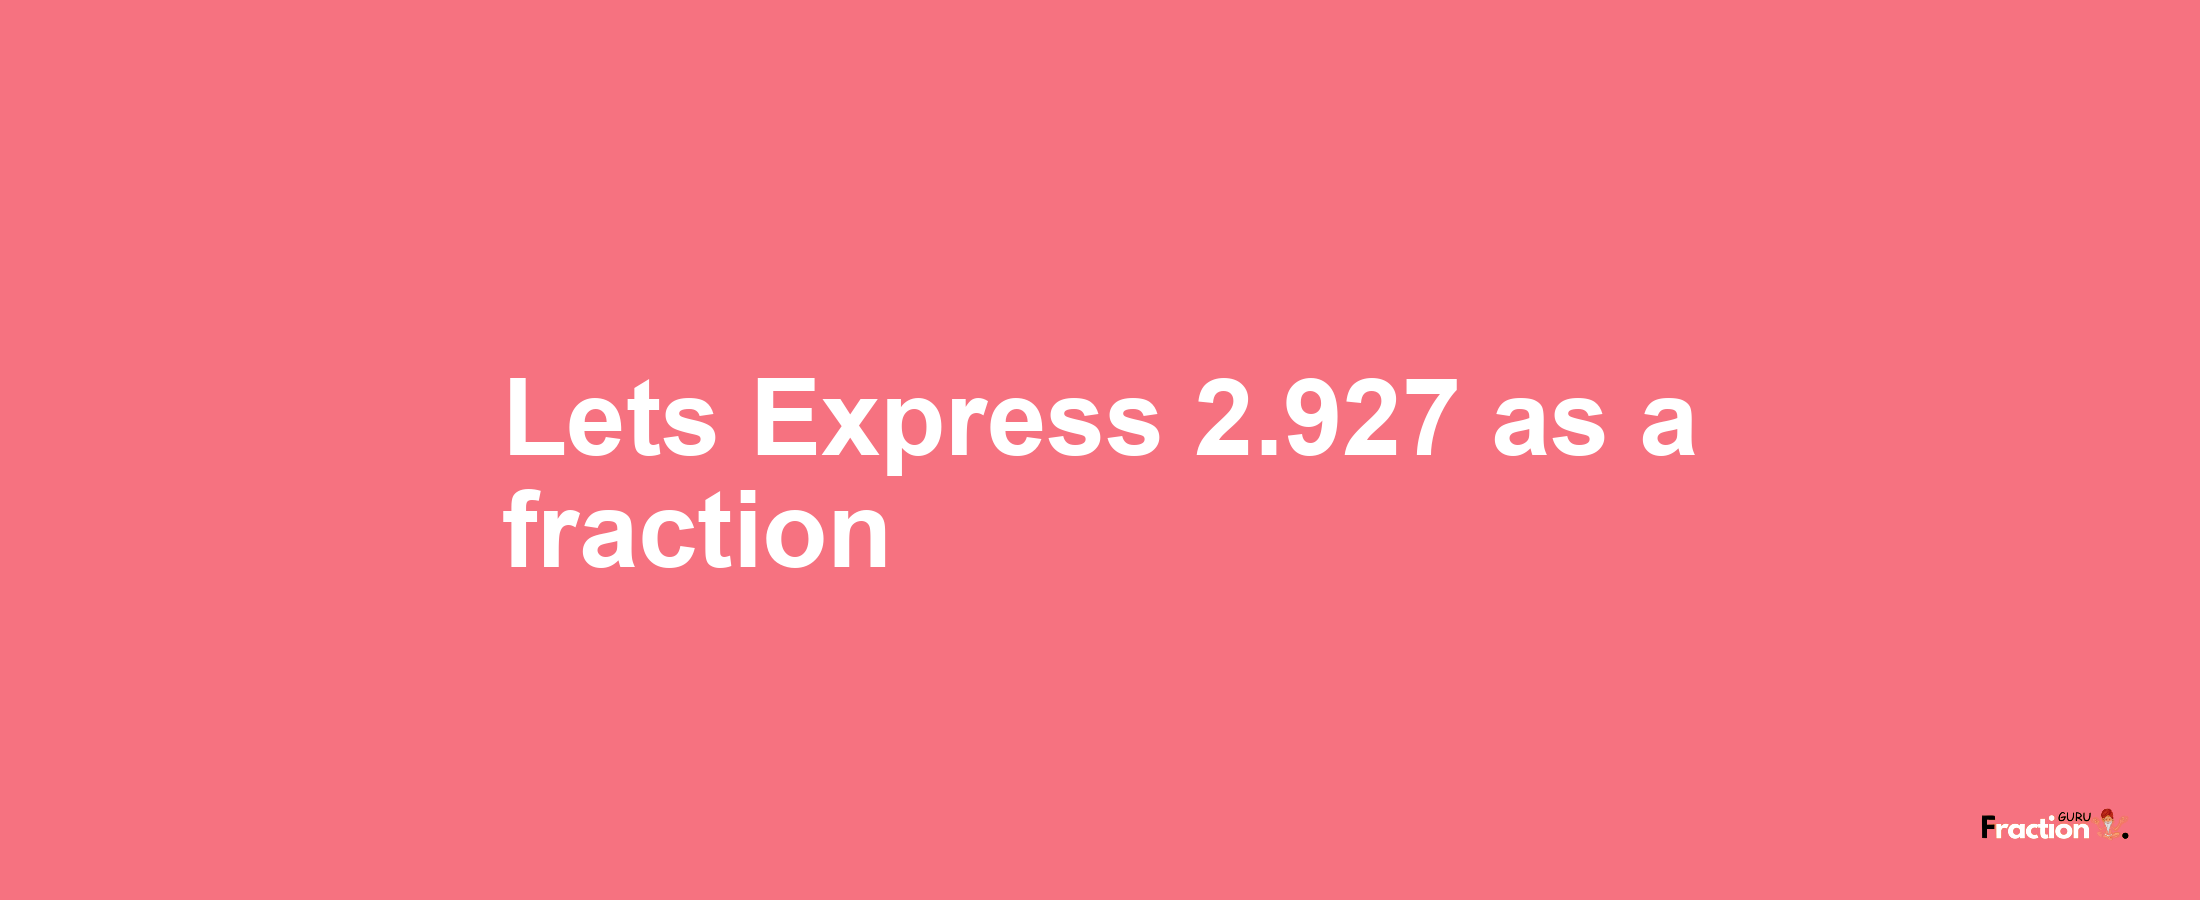 Lets Express 2.927 as afraction